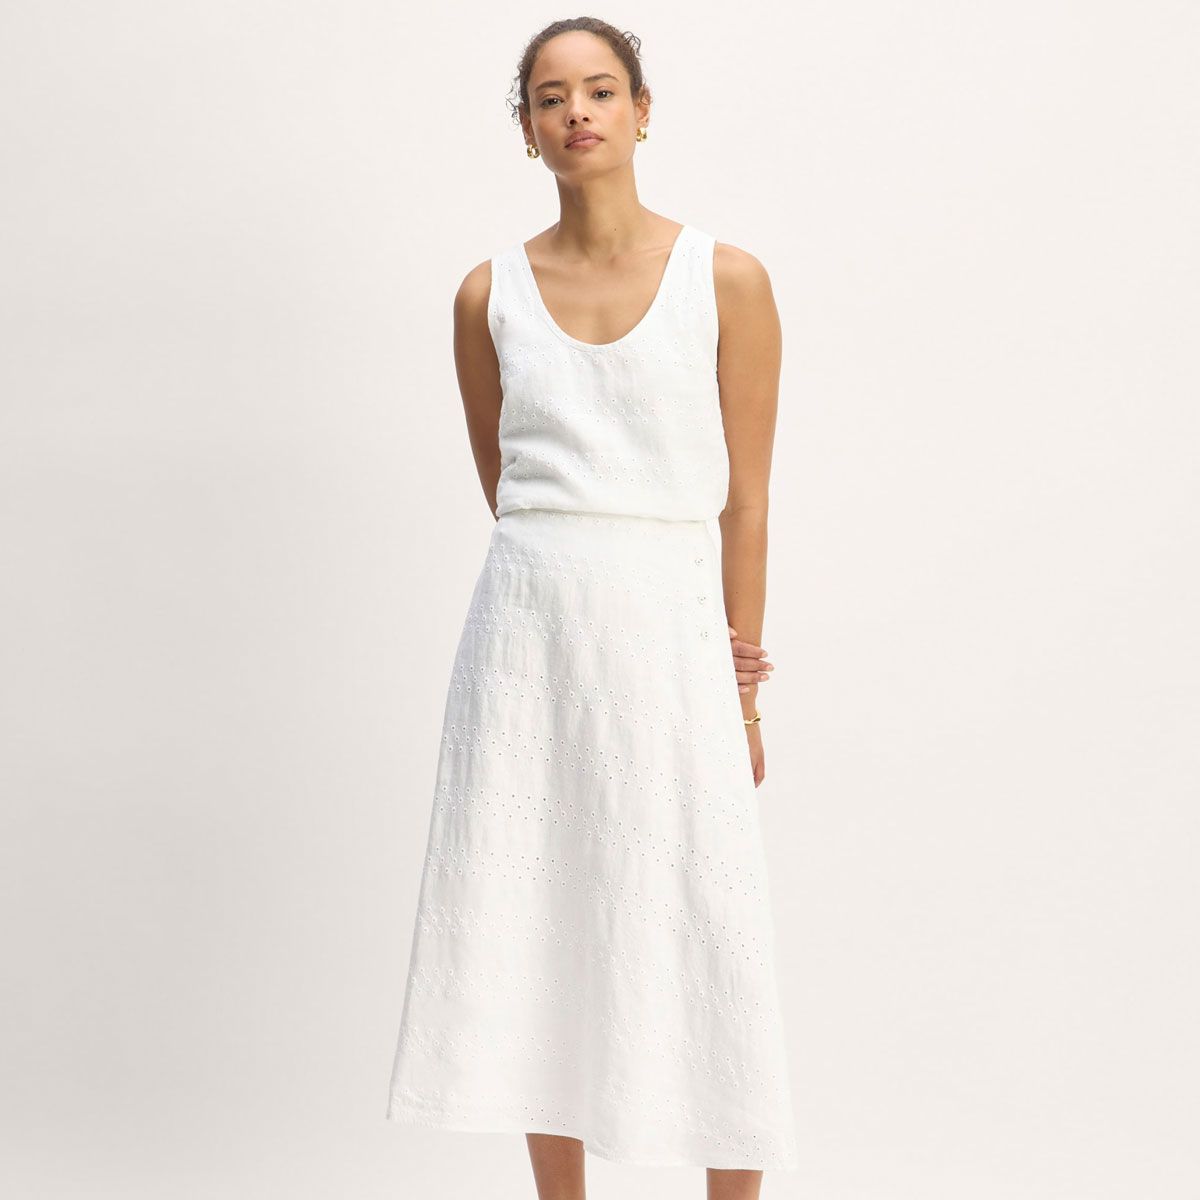 Everlane’s Best-Selling Linen Pieces Are All 25% Off Now